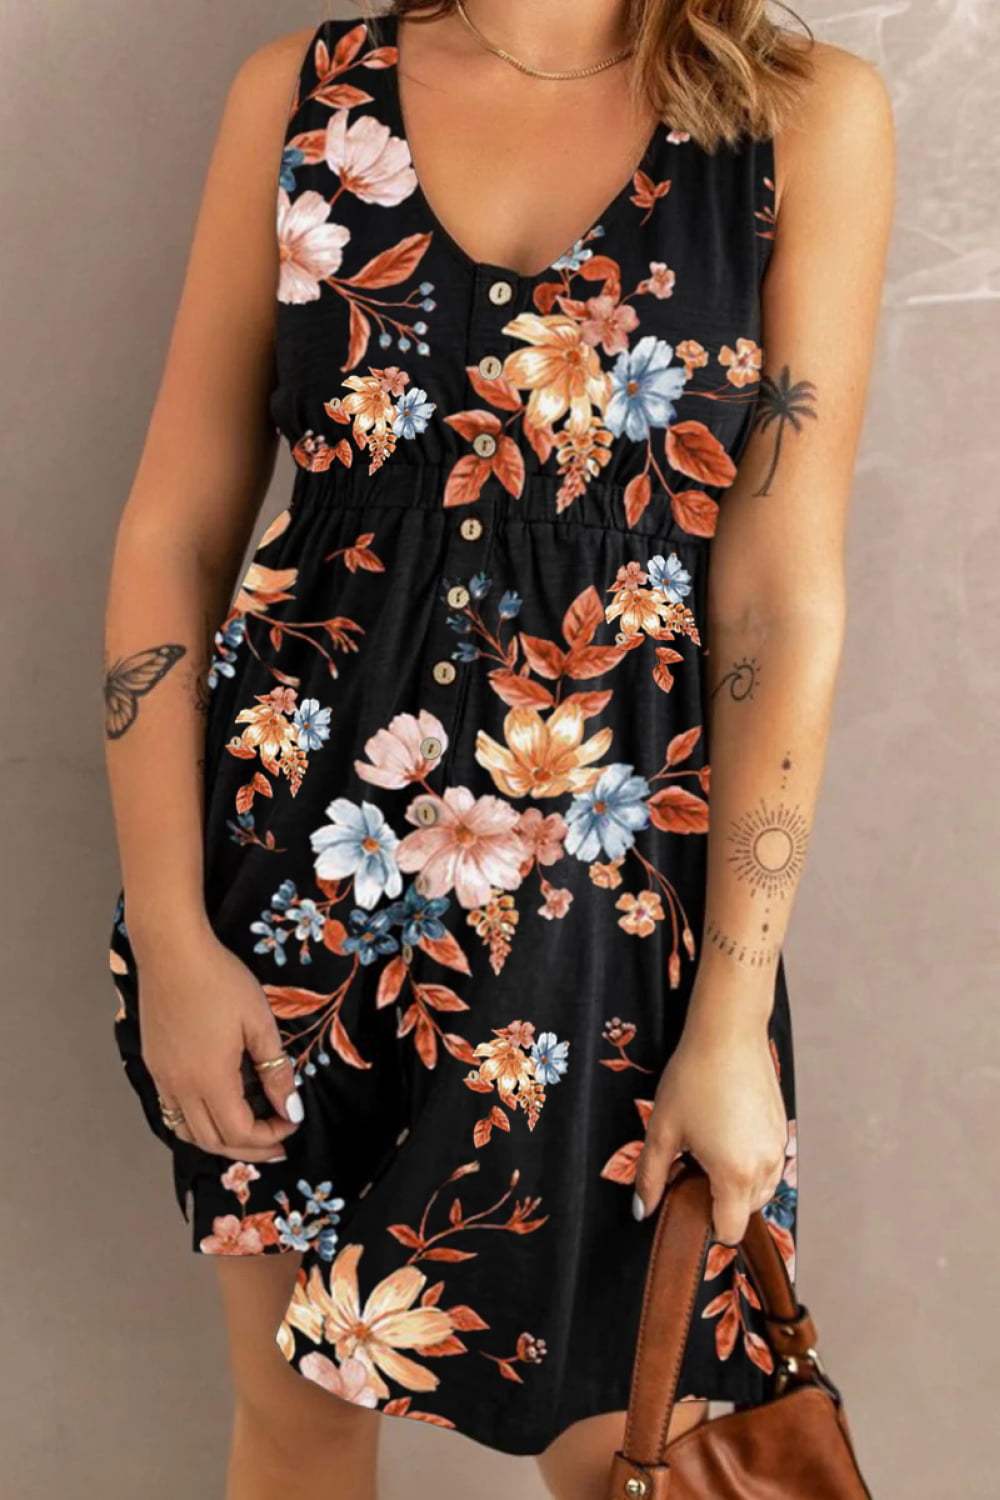 Experience the magic of fashion with our Crazy Thing Called Love dress. Featuring a unique scoop neck, sleeveless design, and convenient button closure, this dress is both stylish and functional